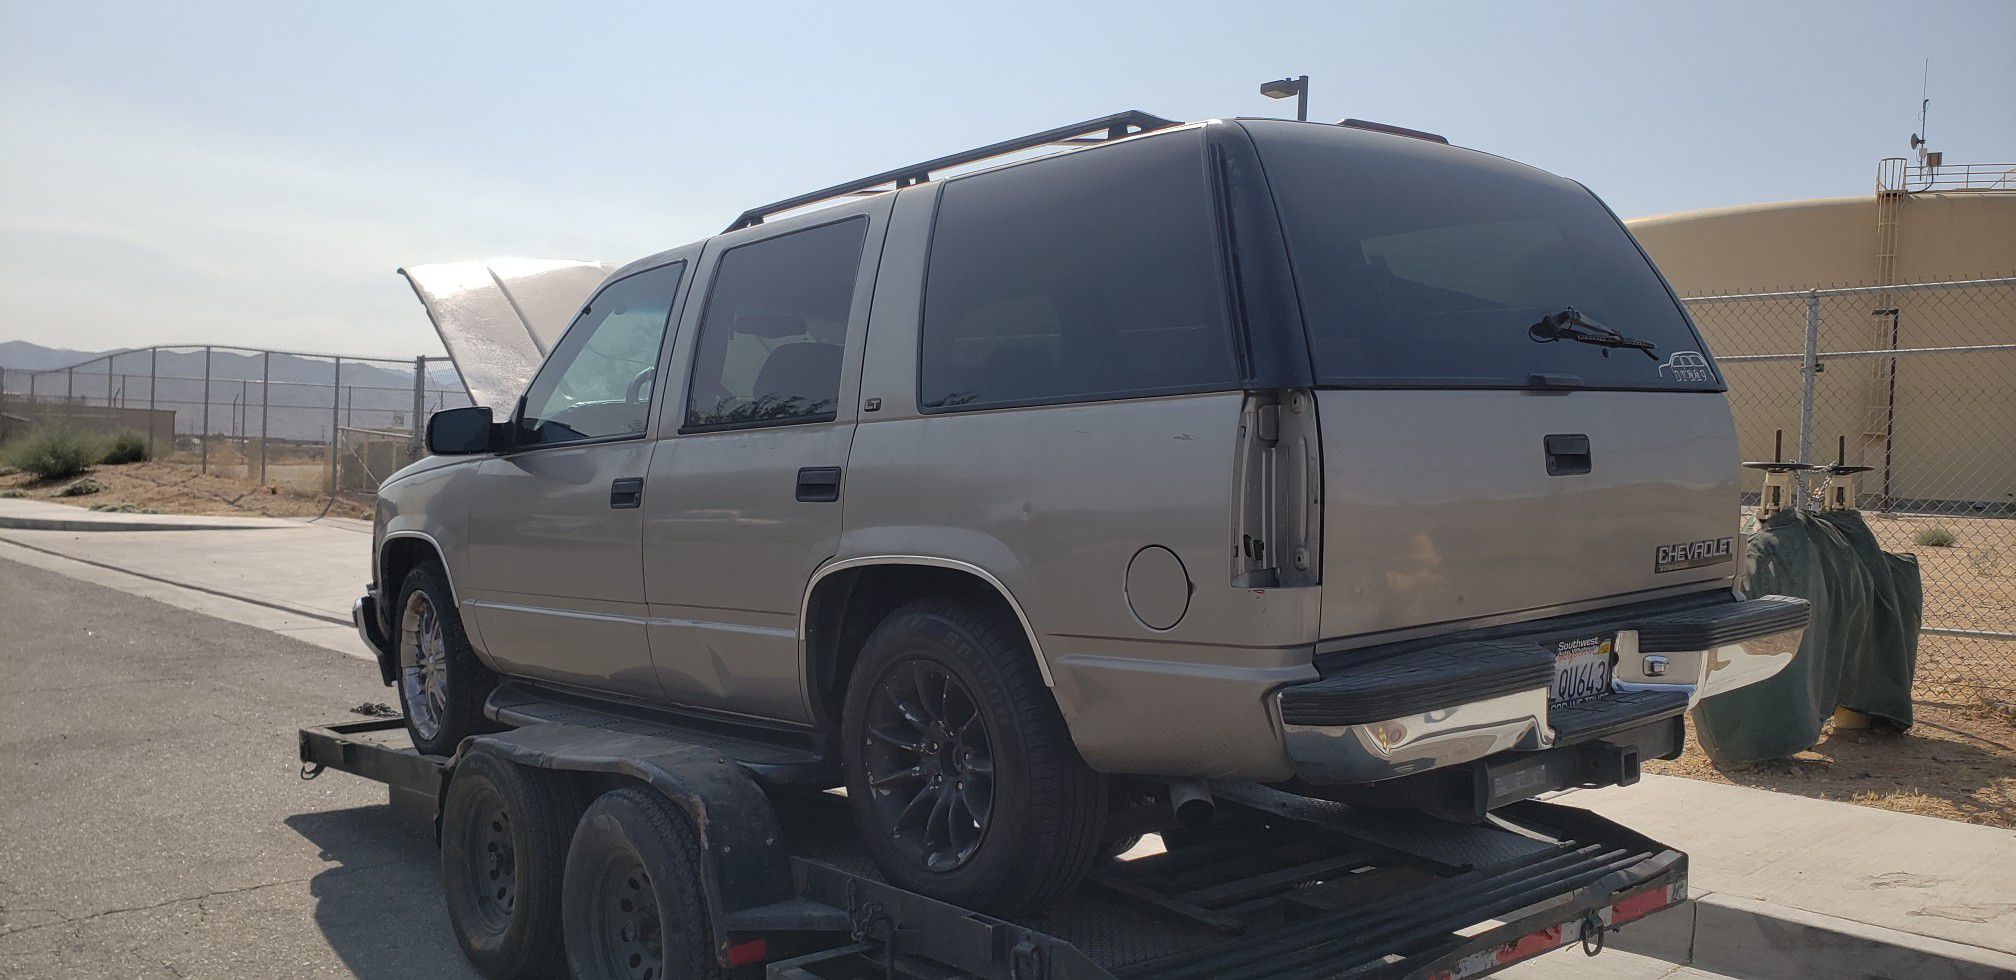 99 Chevy Tahoe for parts No motor no transmission '